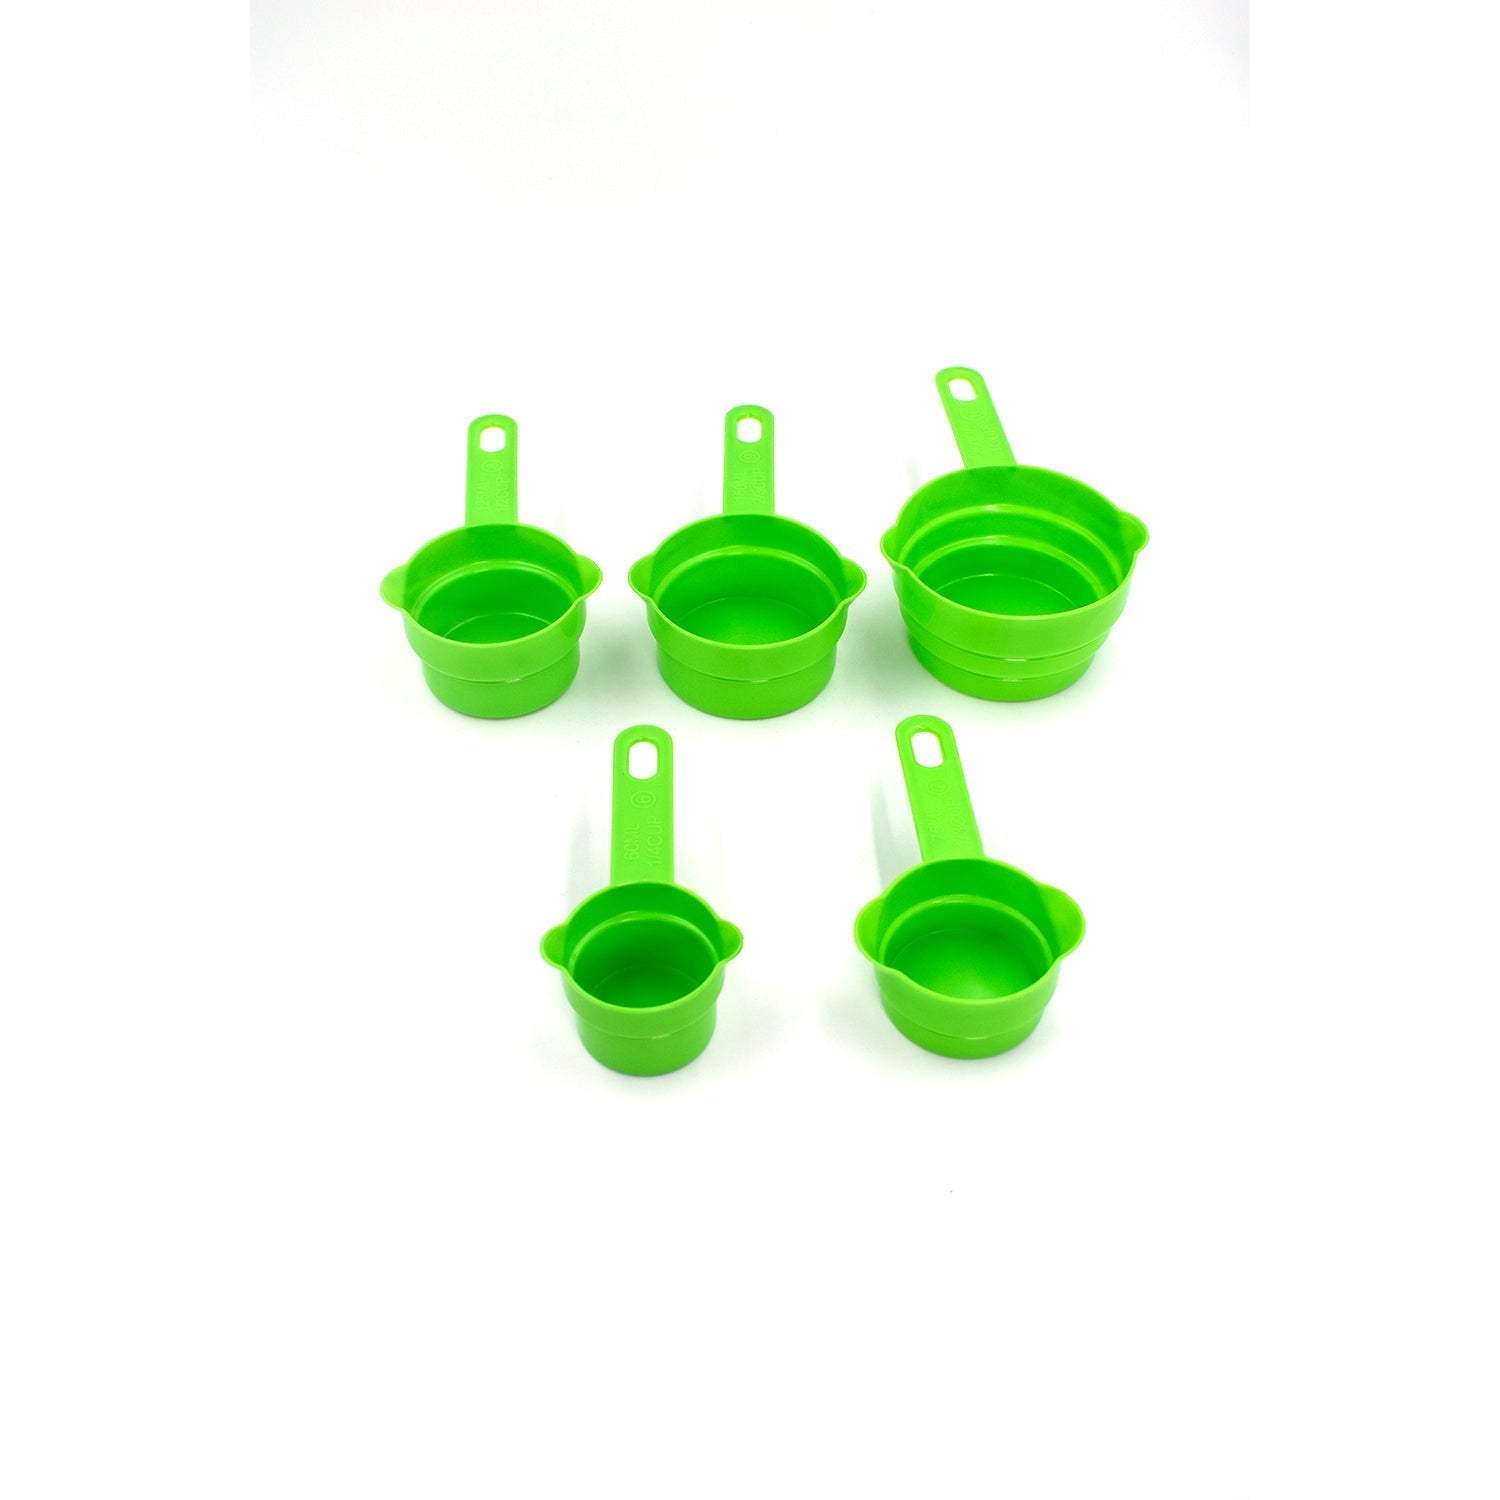 2646 G 11 Pc Measuring Cup Set For Pouring And Picking Of Various Food Items And All With Nice Measurements. DeoDap